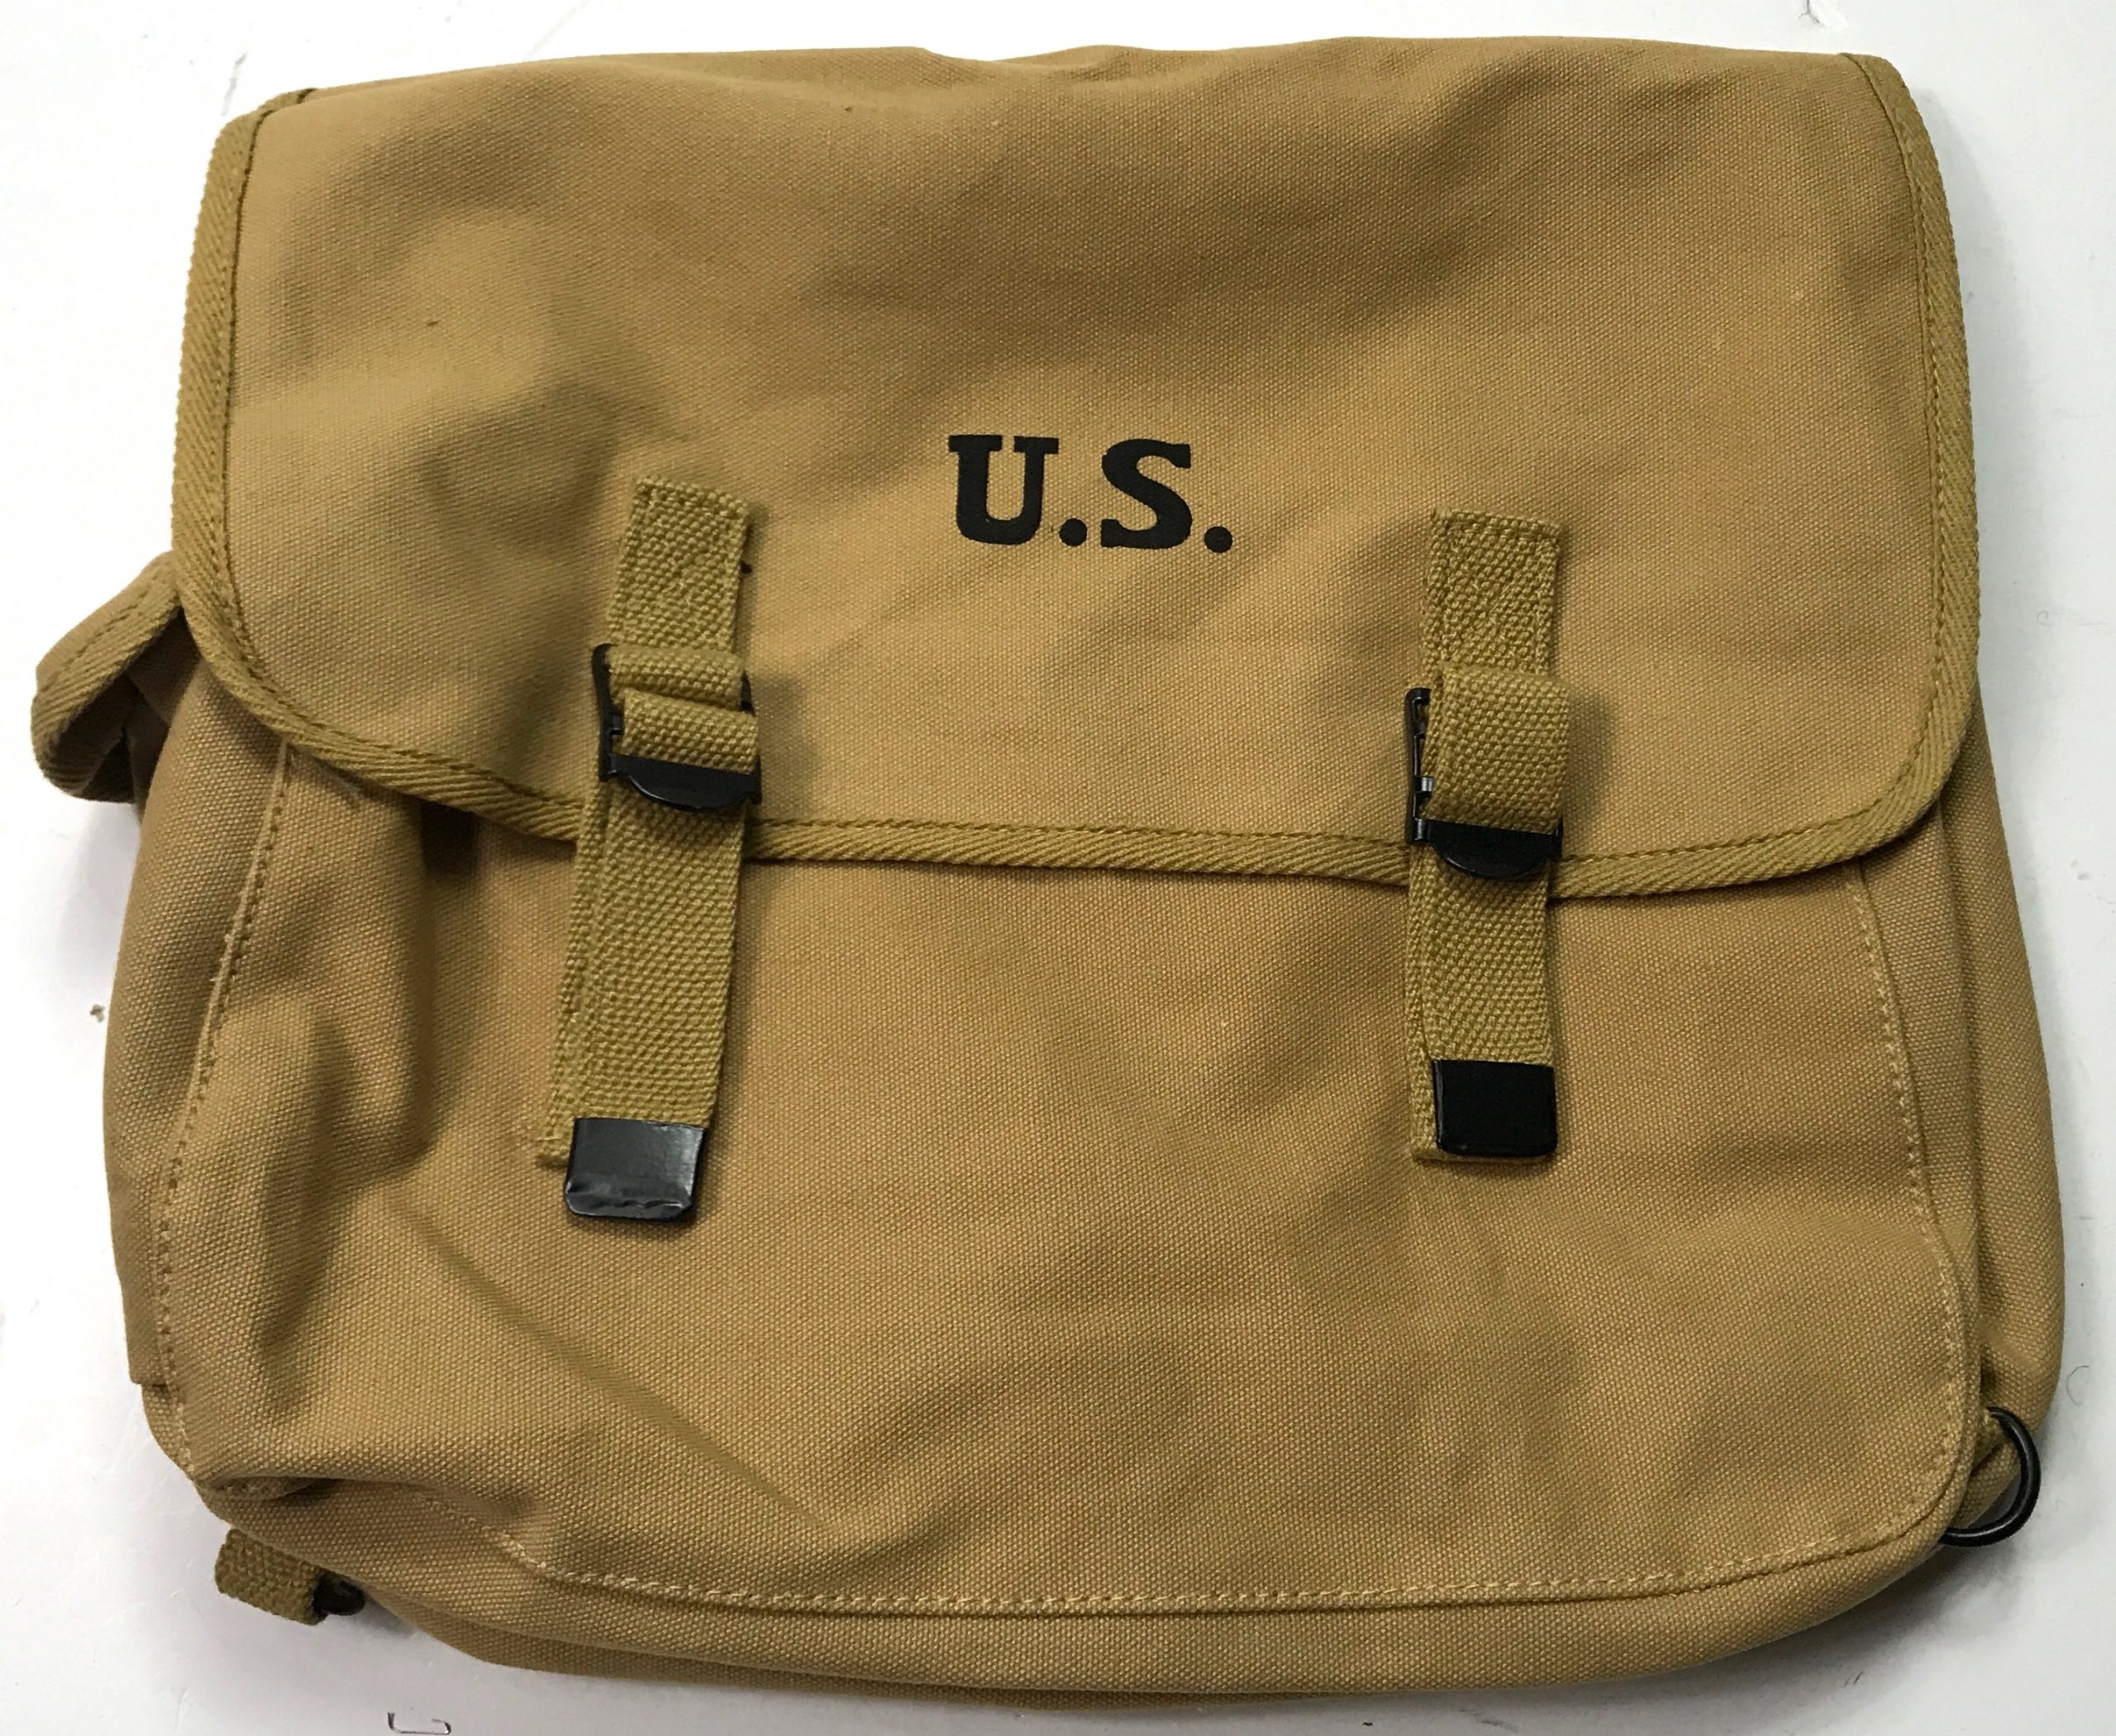 M36 musette bag 1943 - Doughboy Military Collectables Springfield Missouri